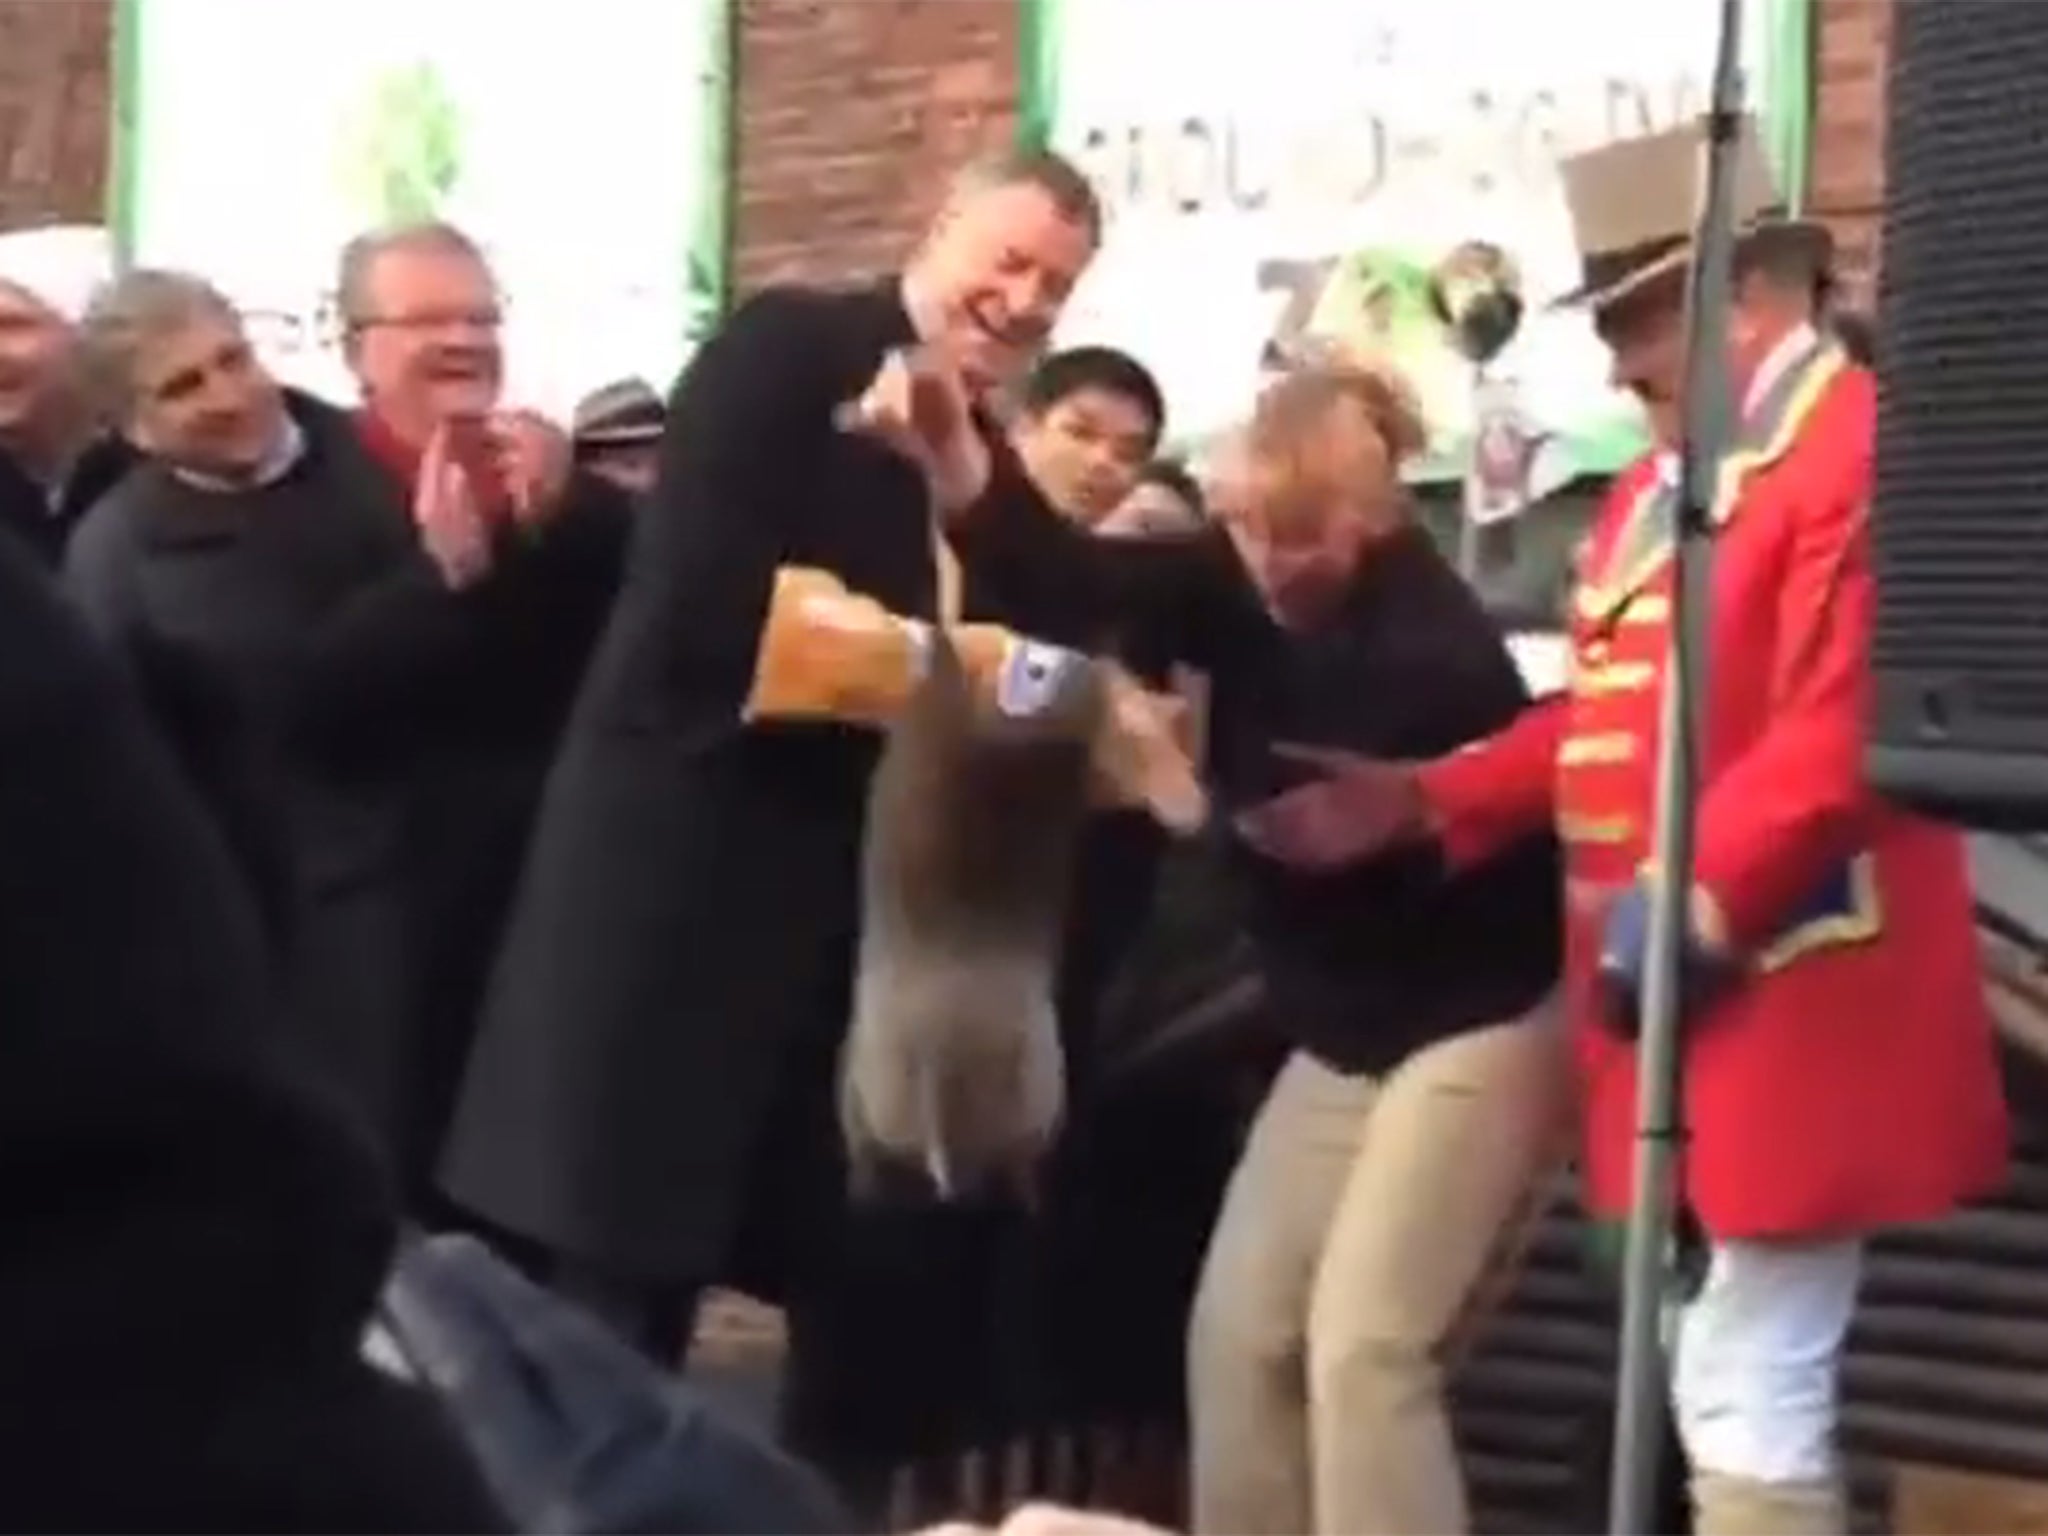 The moment the groundhog fell from the New York mayor's arms